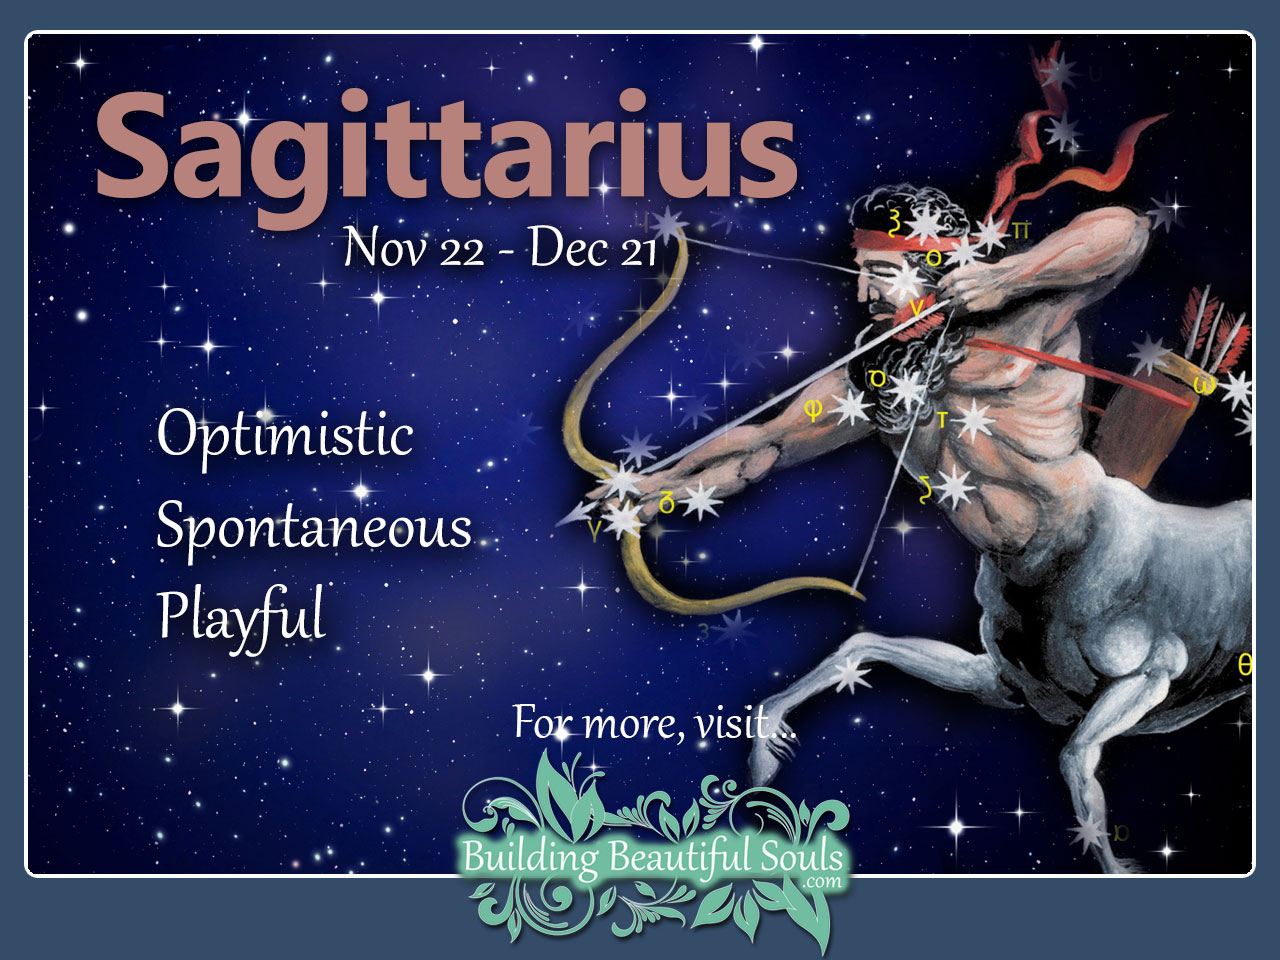 How To Be The Most Astrolutely Sagittarius Man